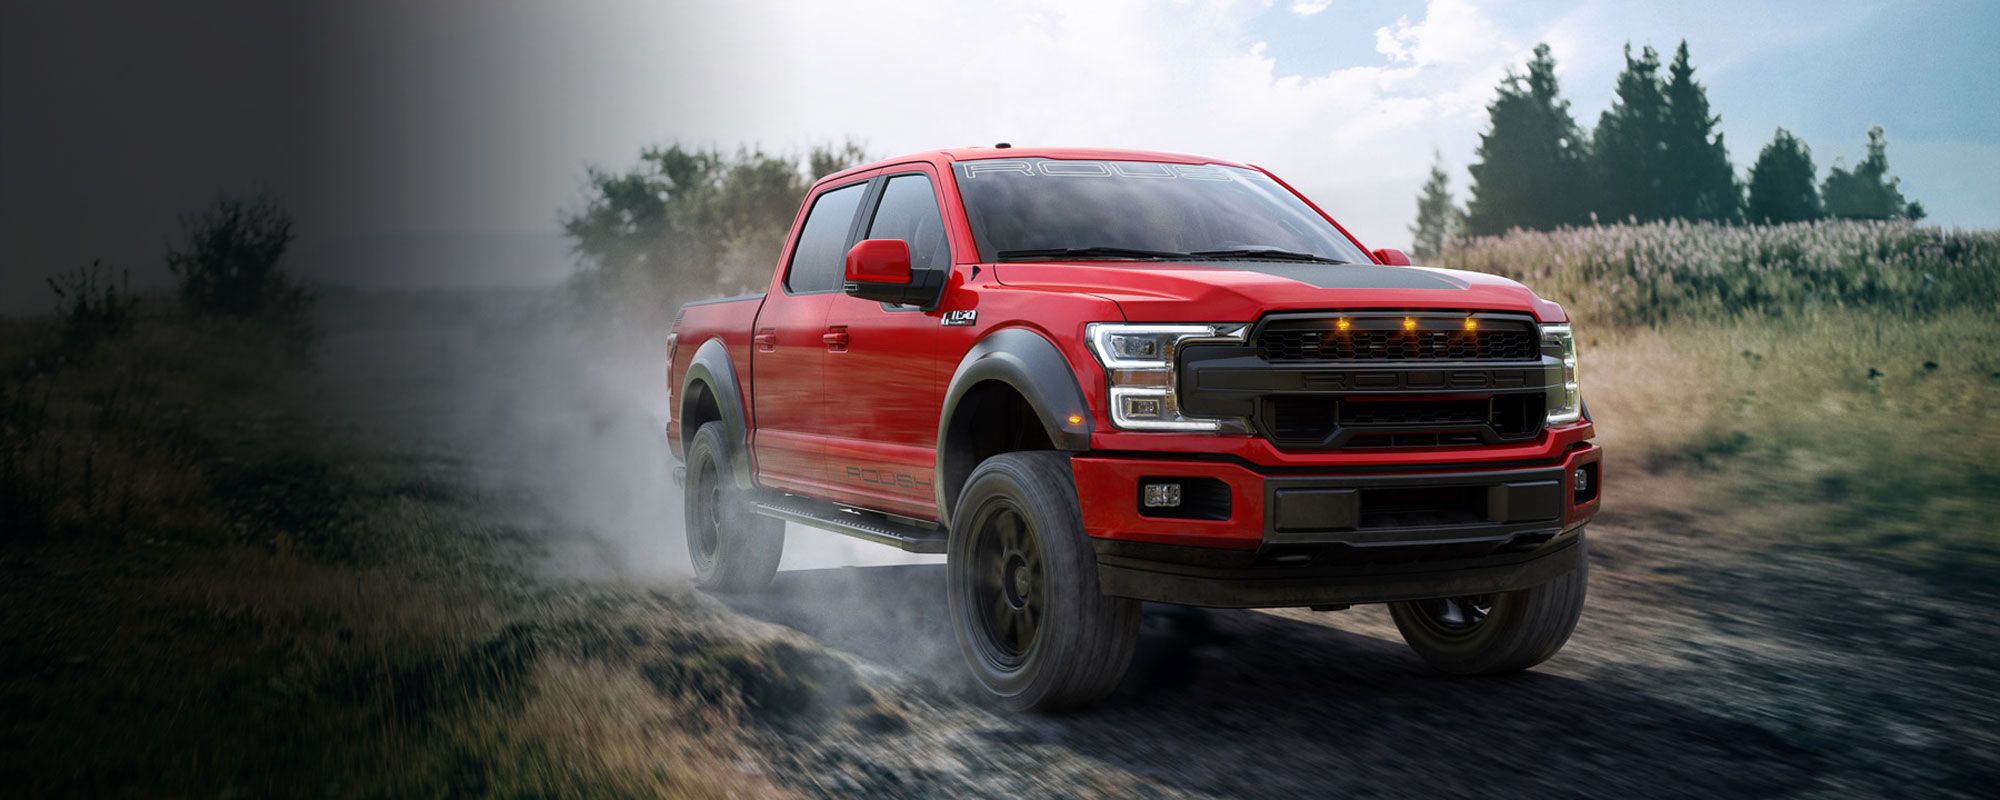 2020 ROUSH F-150 Supercharged